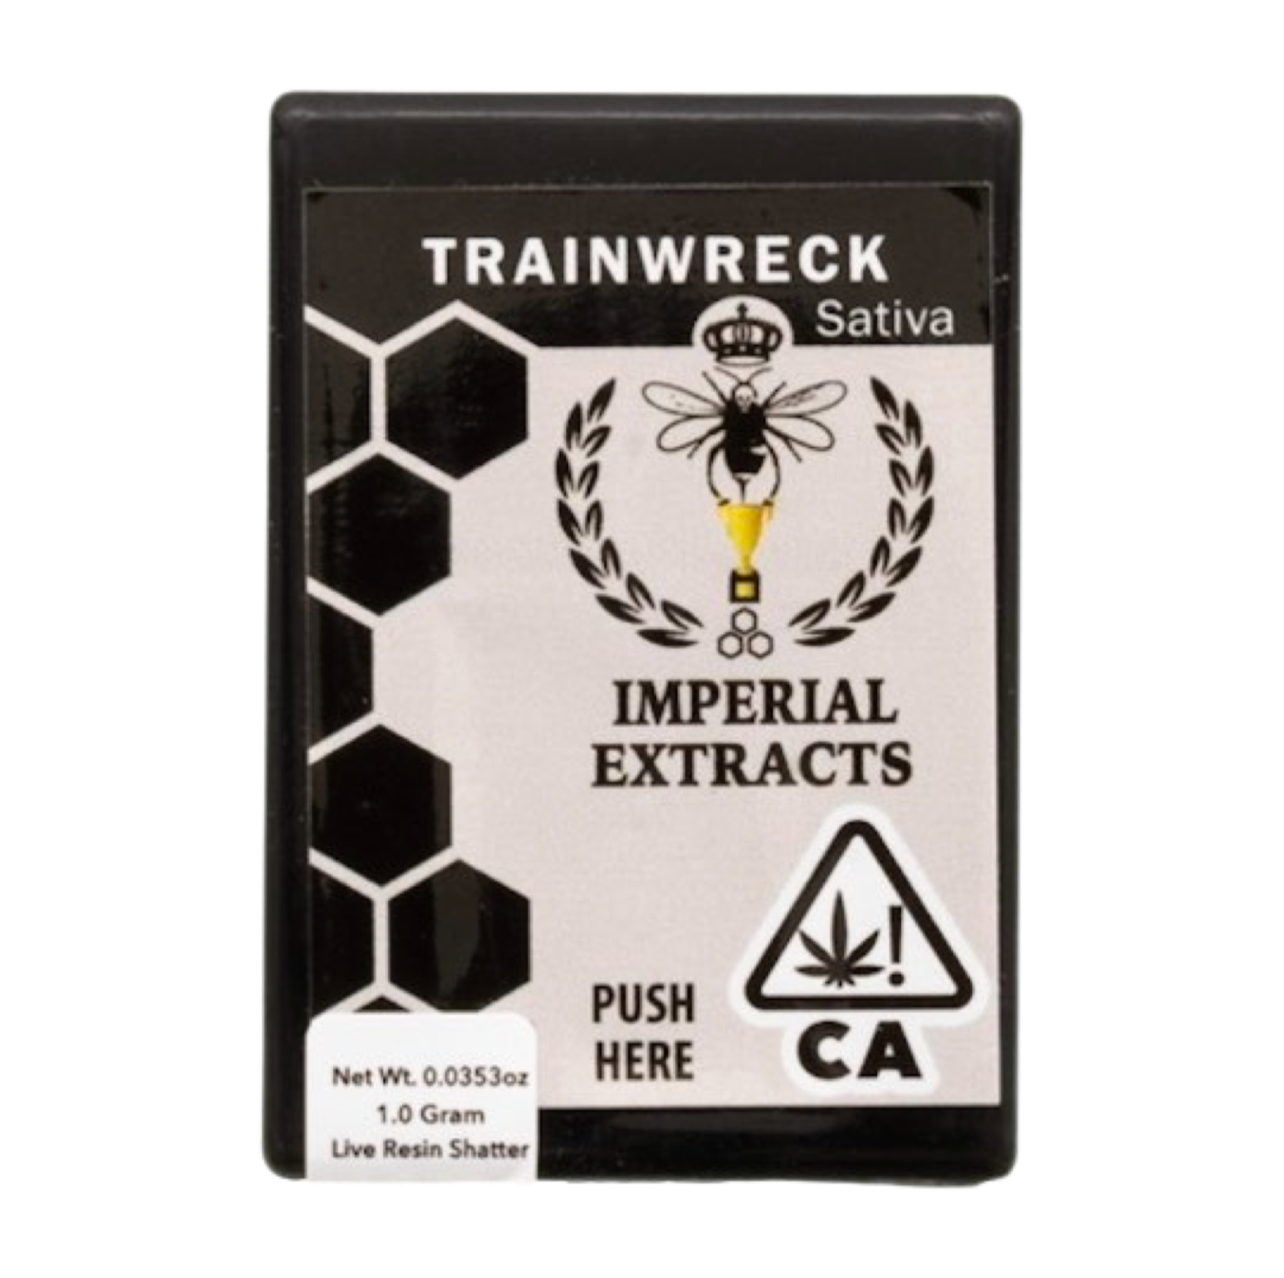 1 Gram Live Resin Shatter by Imperial Extracts | Train Wreck | Sativa